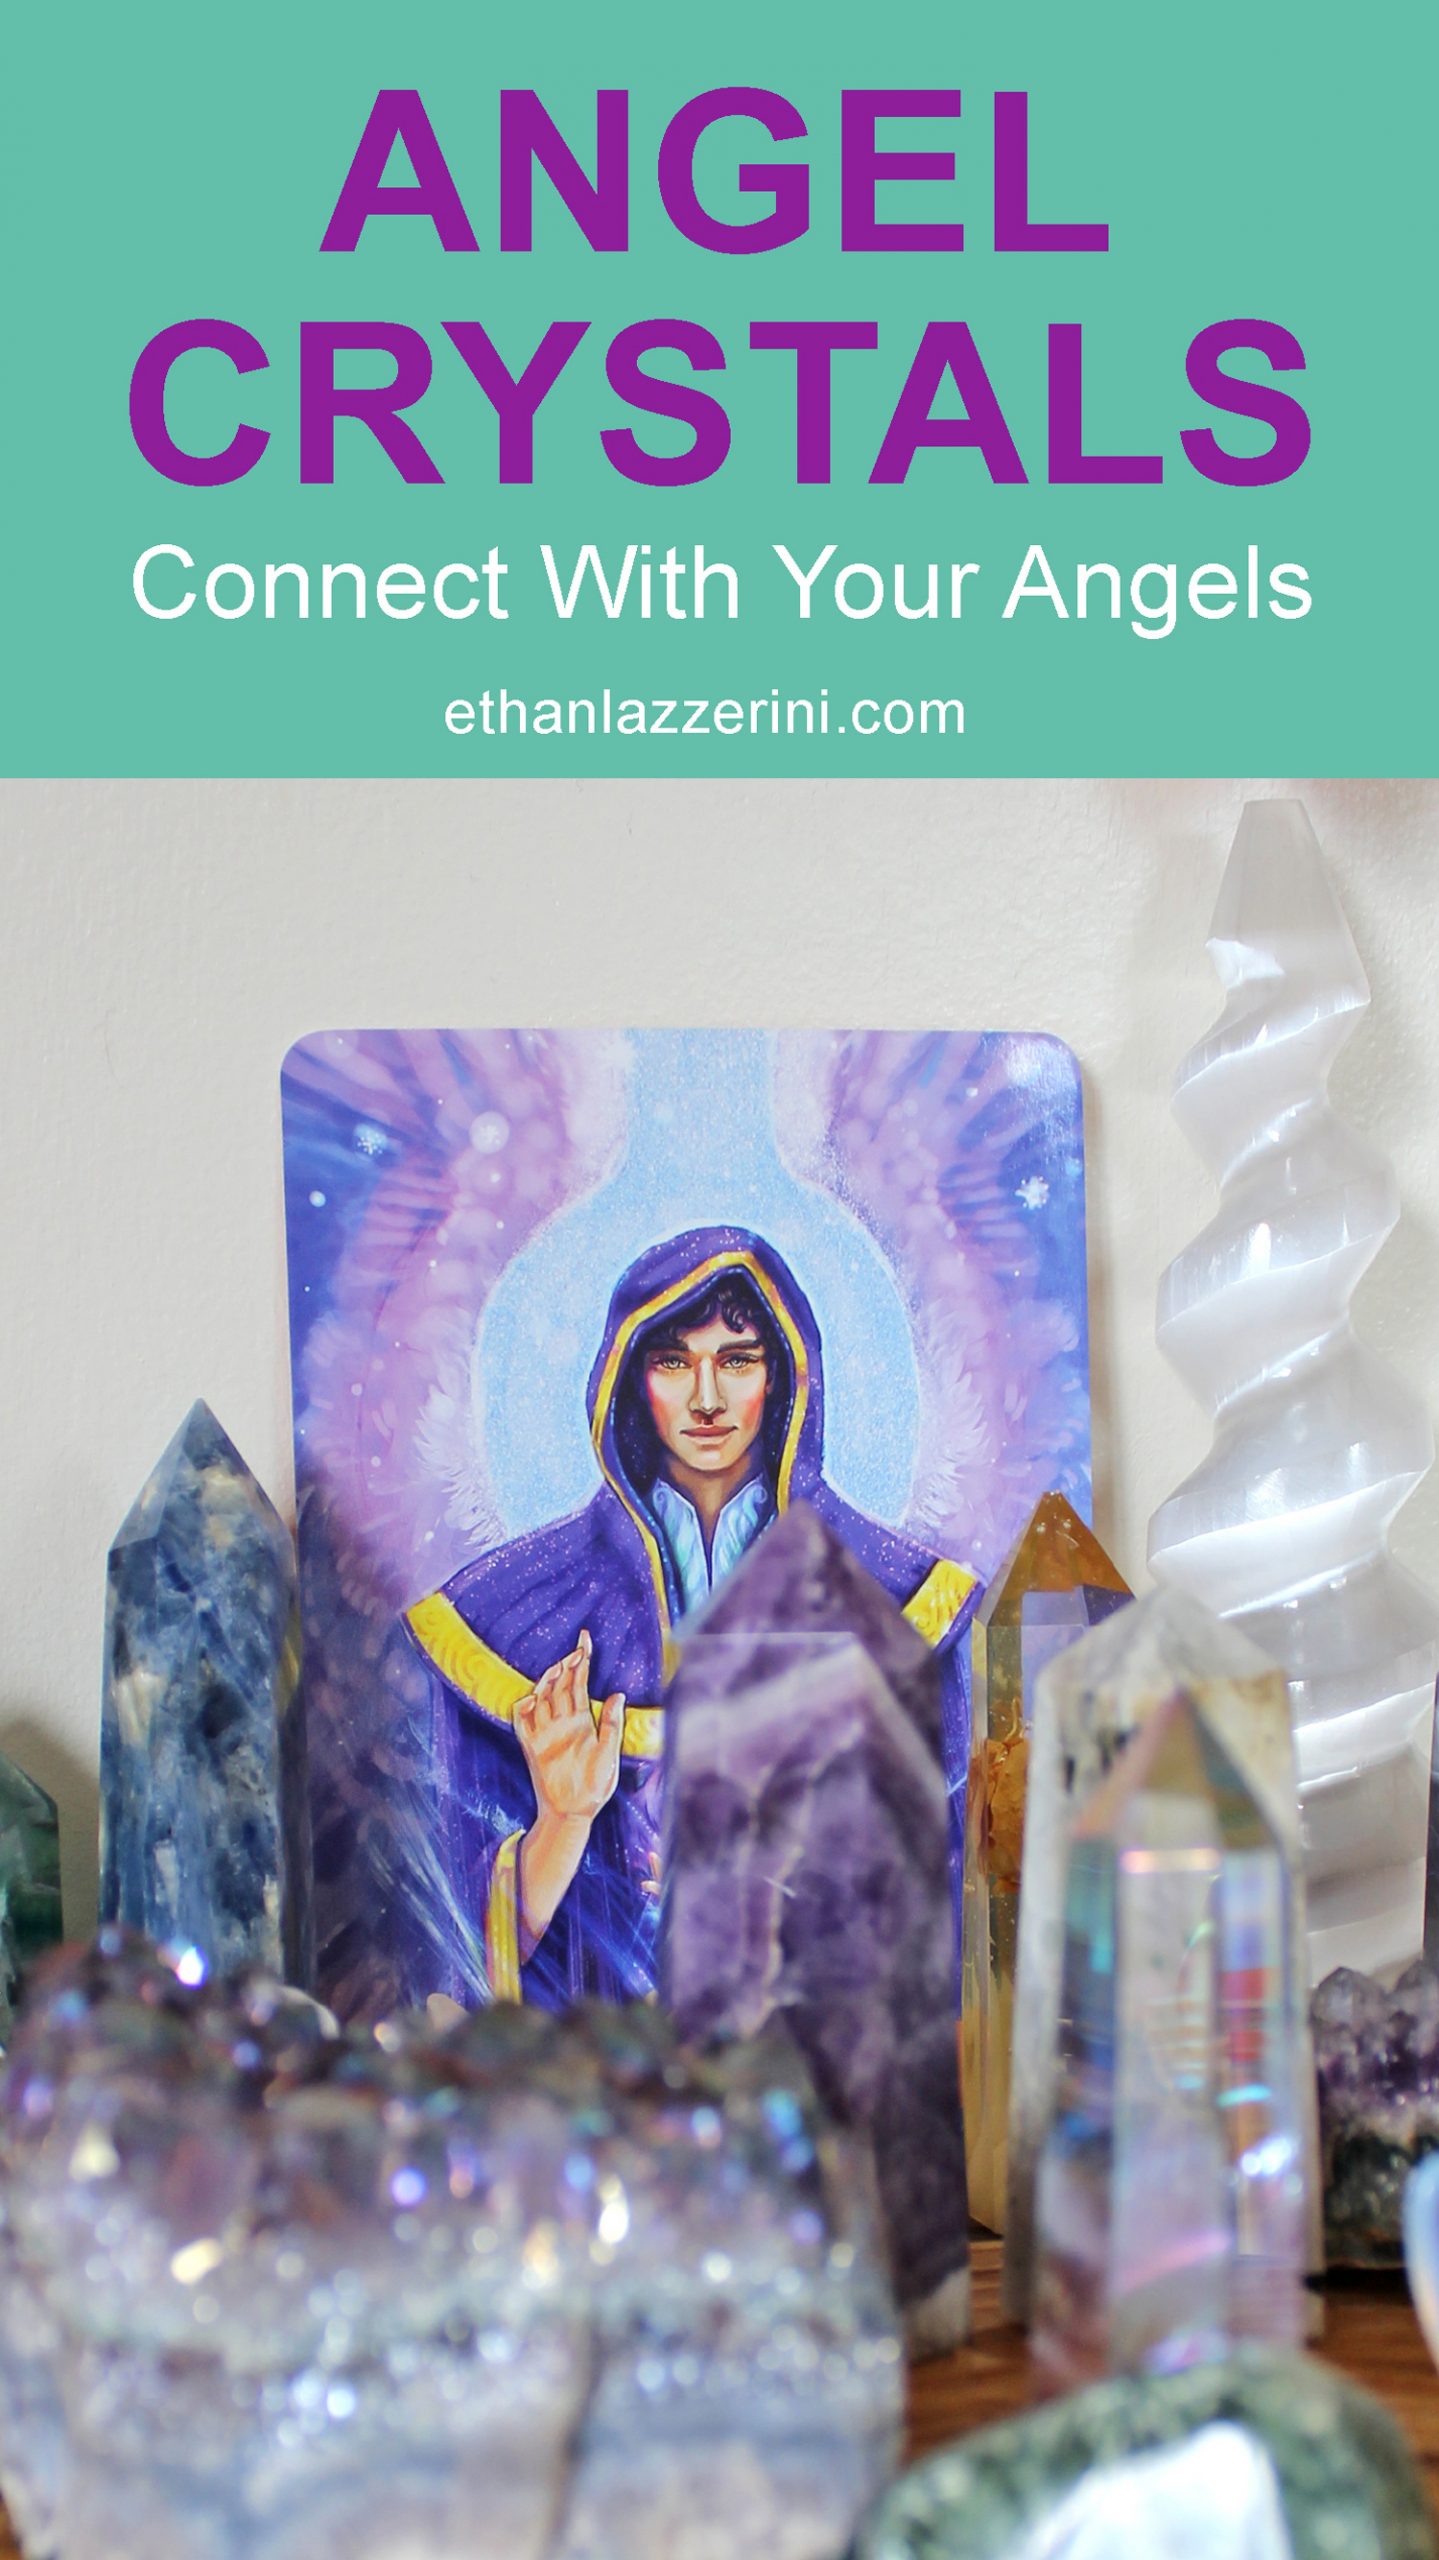 Crystals to connect with angels, angel cards and crystals